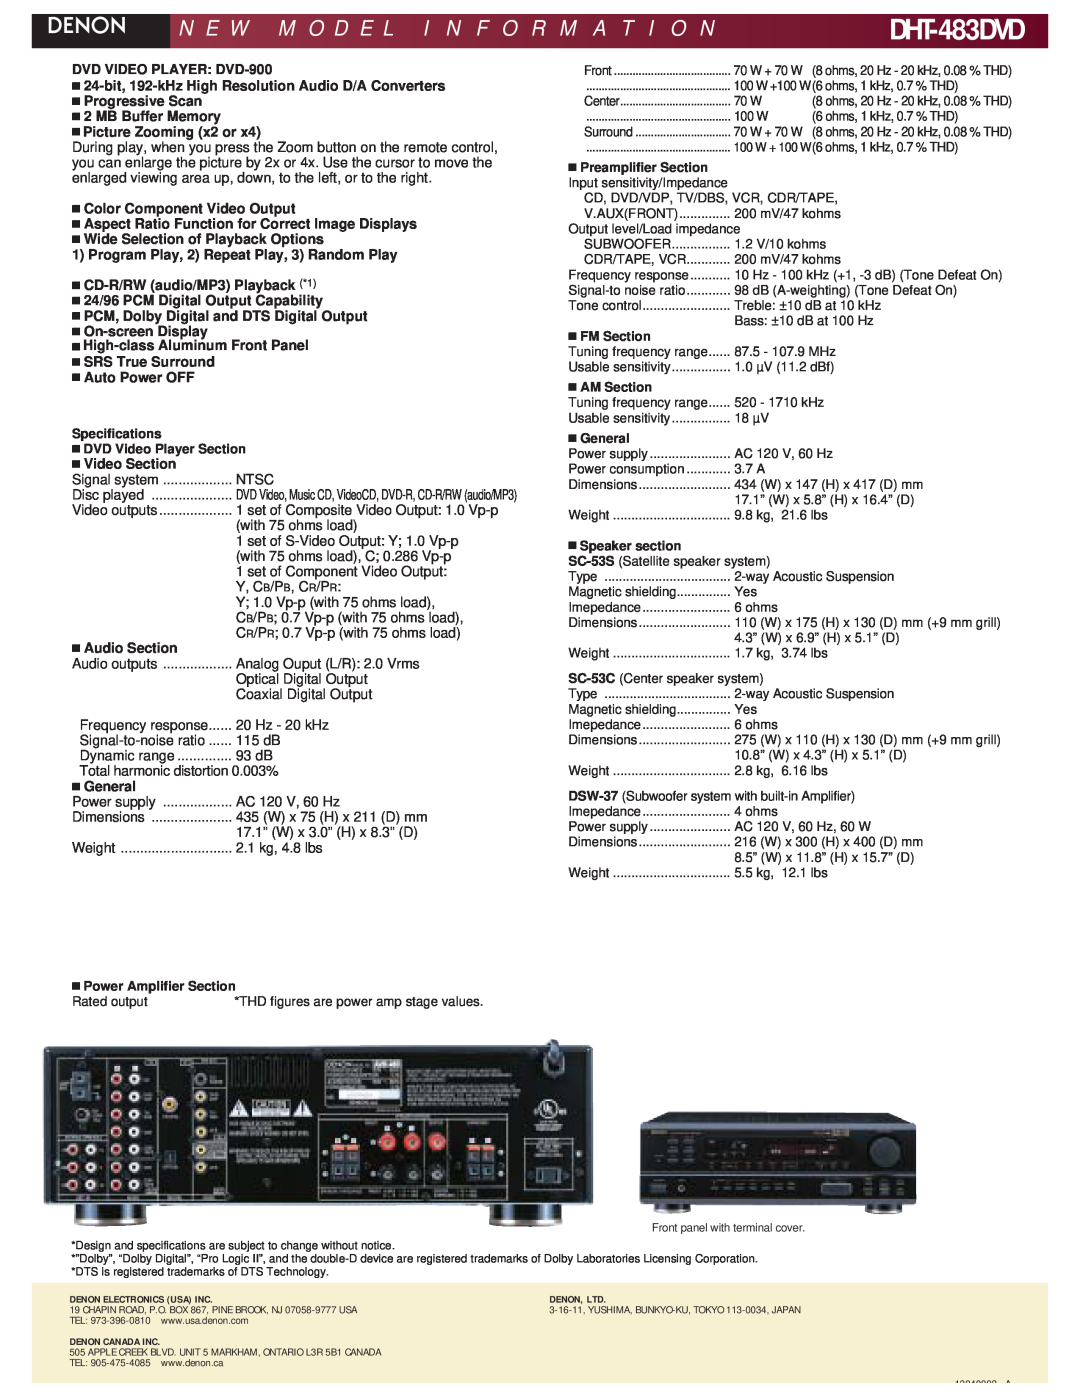 Denon DHT-483DVD manual N E W M O D E L I N F O, R M A T 